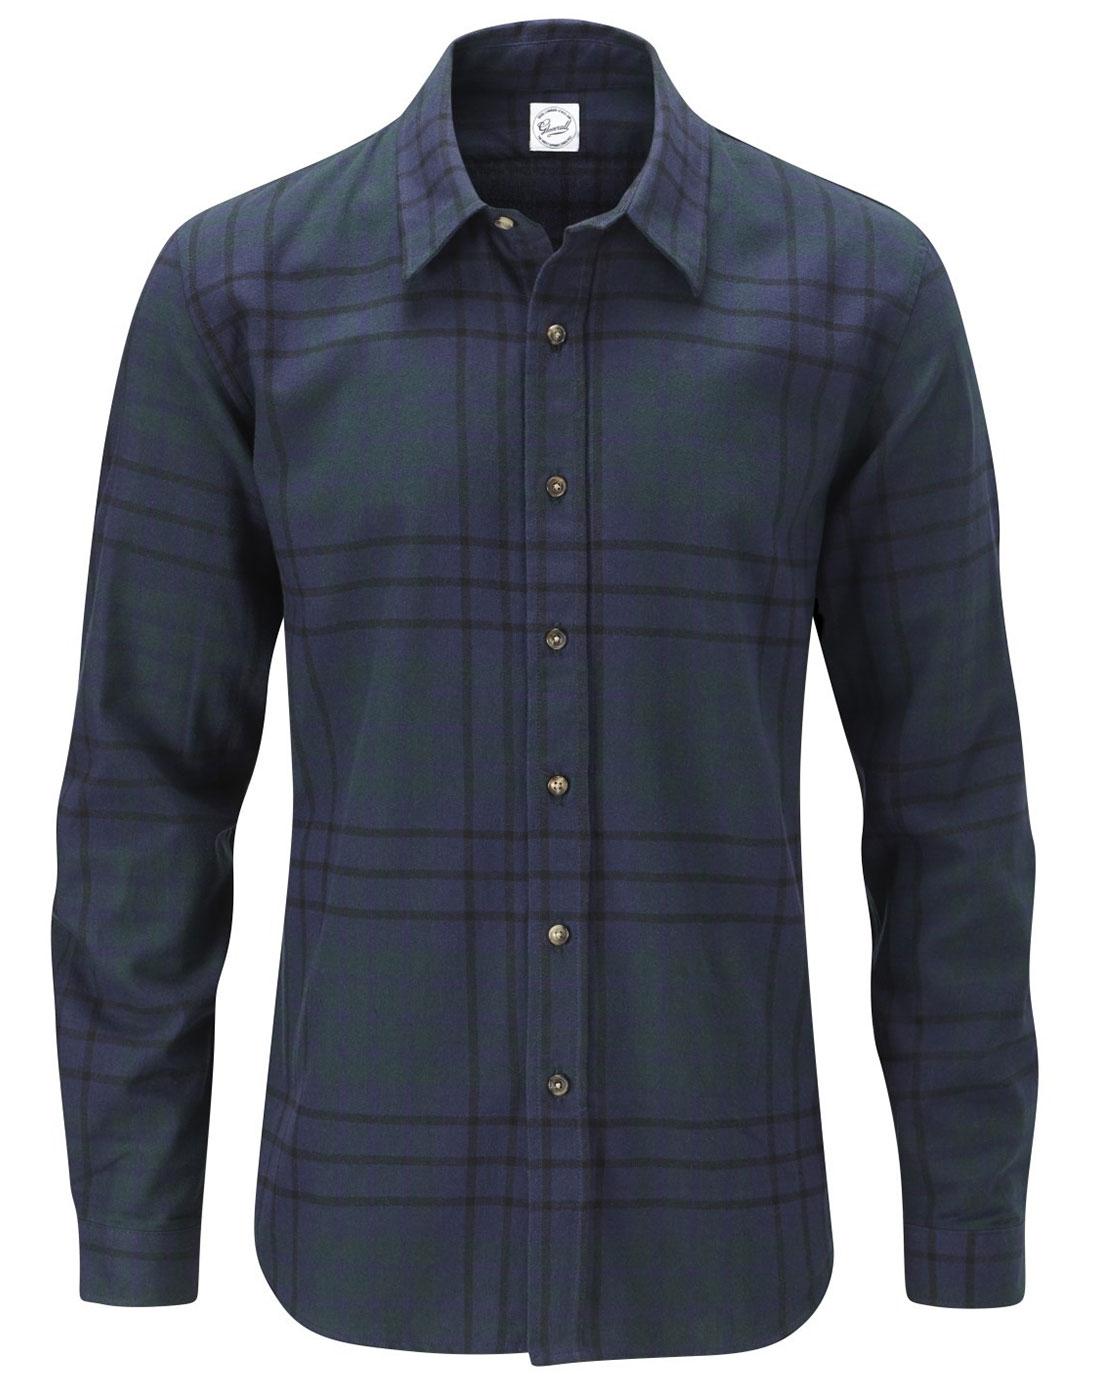 GLOVERALL Retro Mod Check Brushed Cotton Shirt (N)